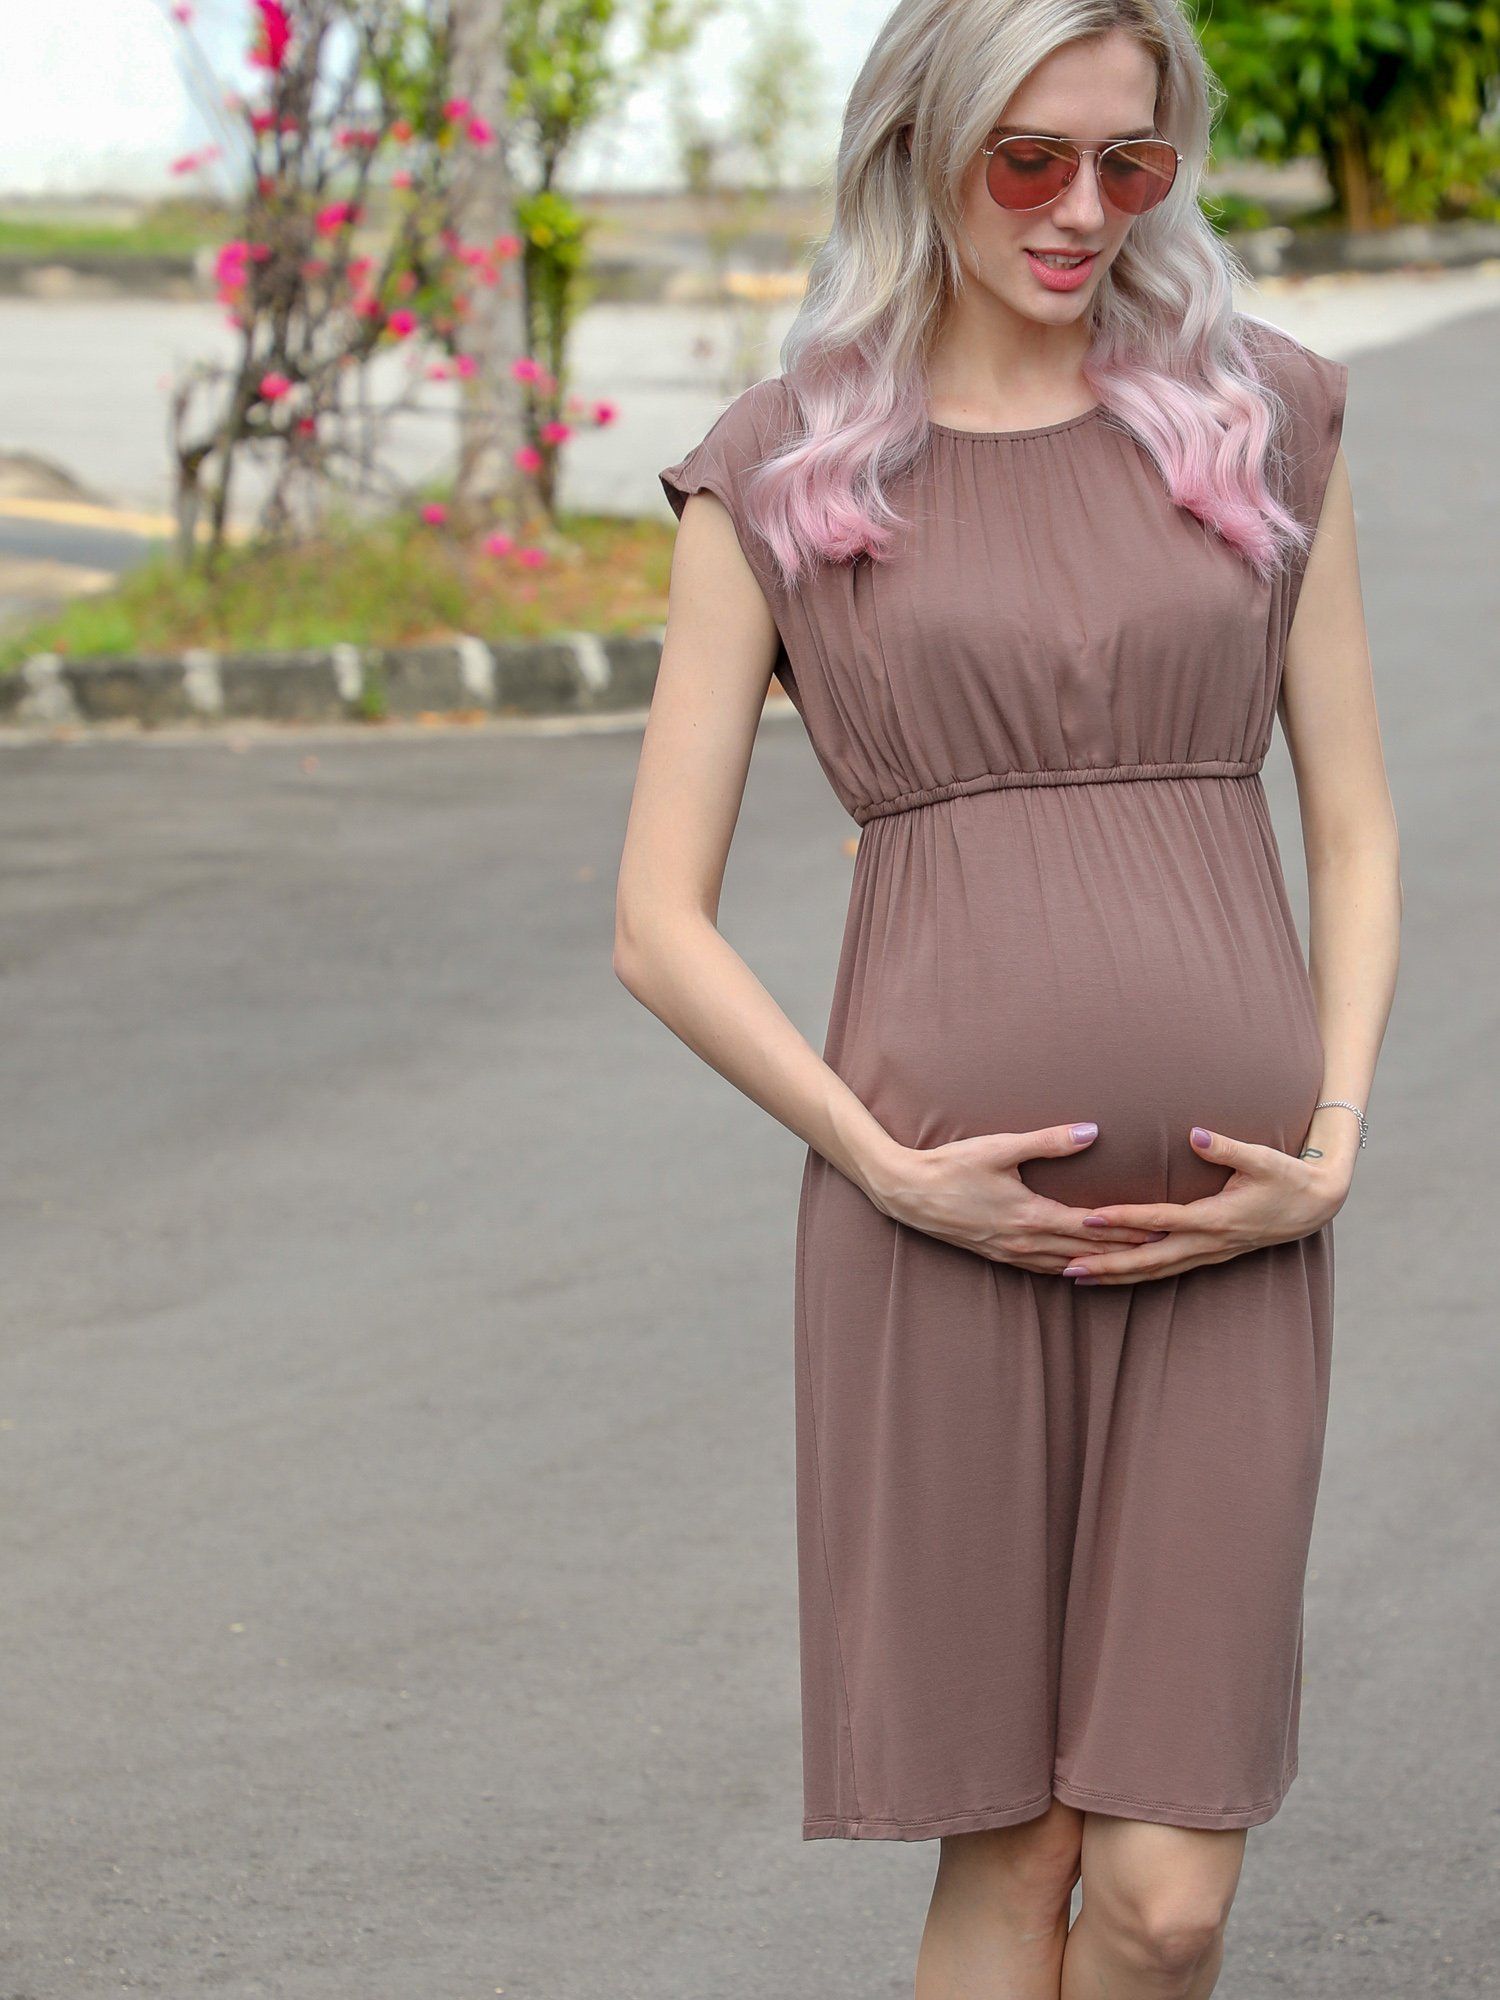 Get Gorgeous Maternity Wear Dresses for Your Pregnancy Journey